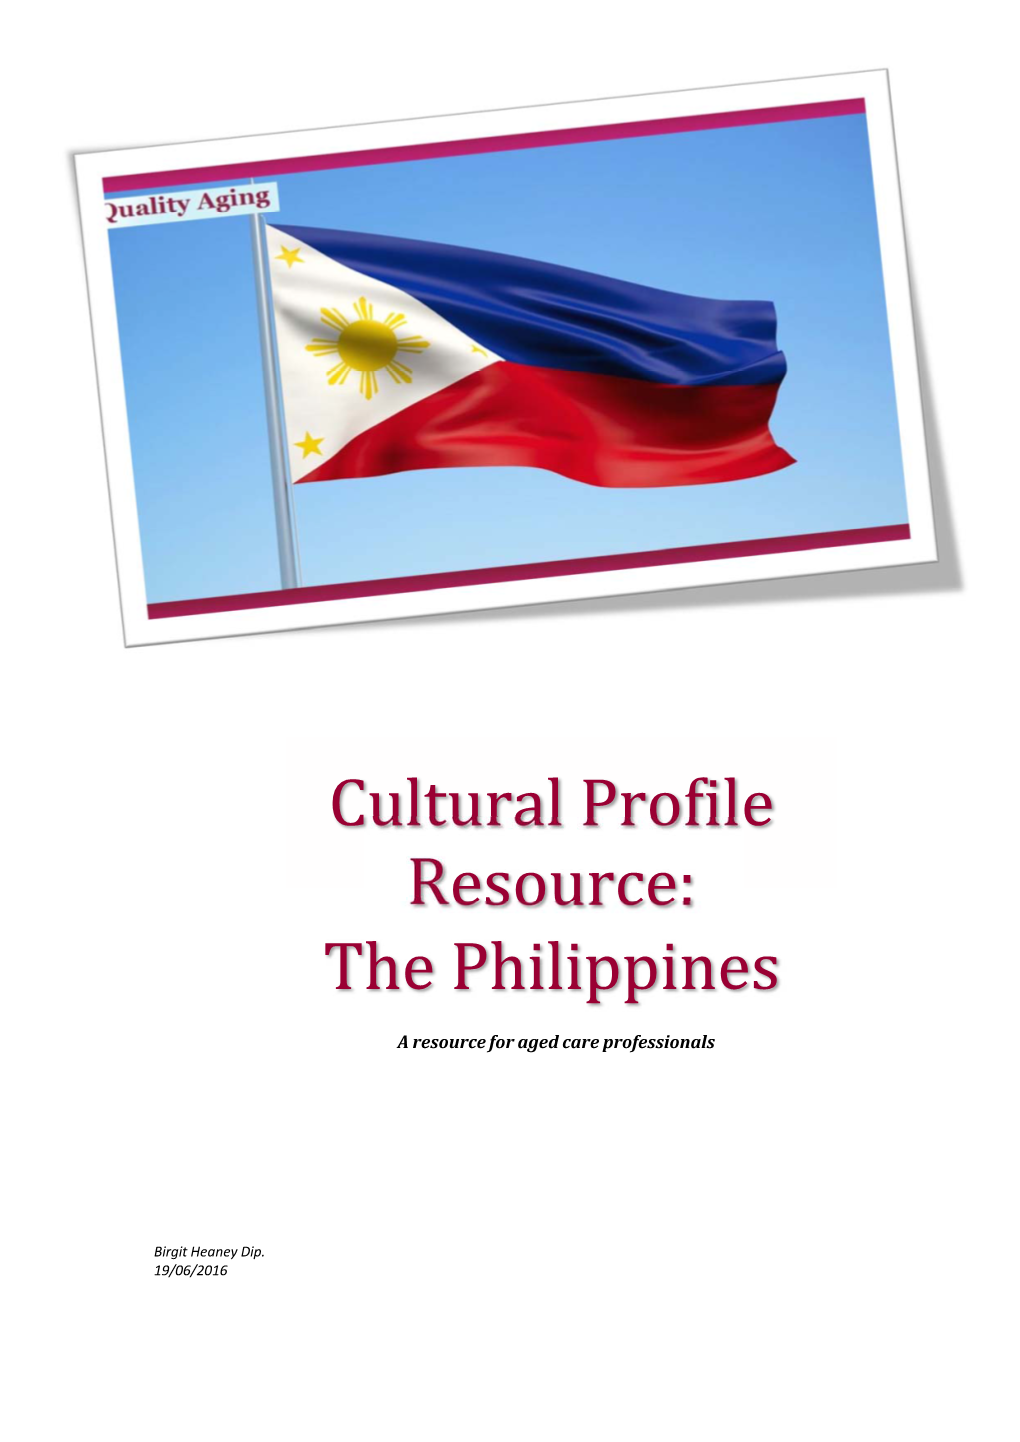 Cultural Profile Resource: the Philippines